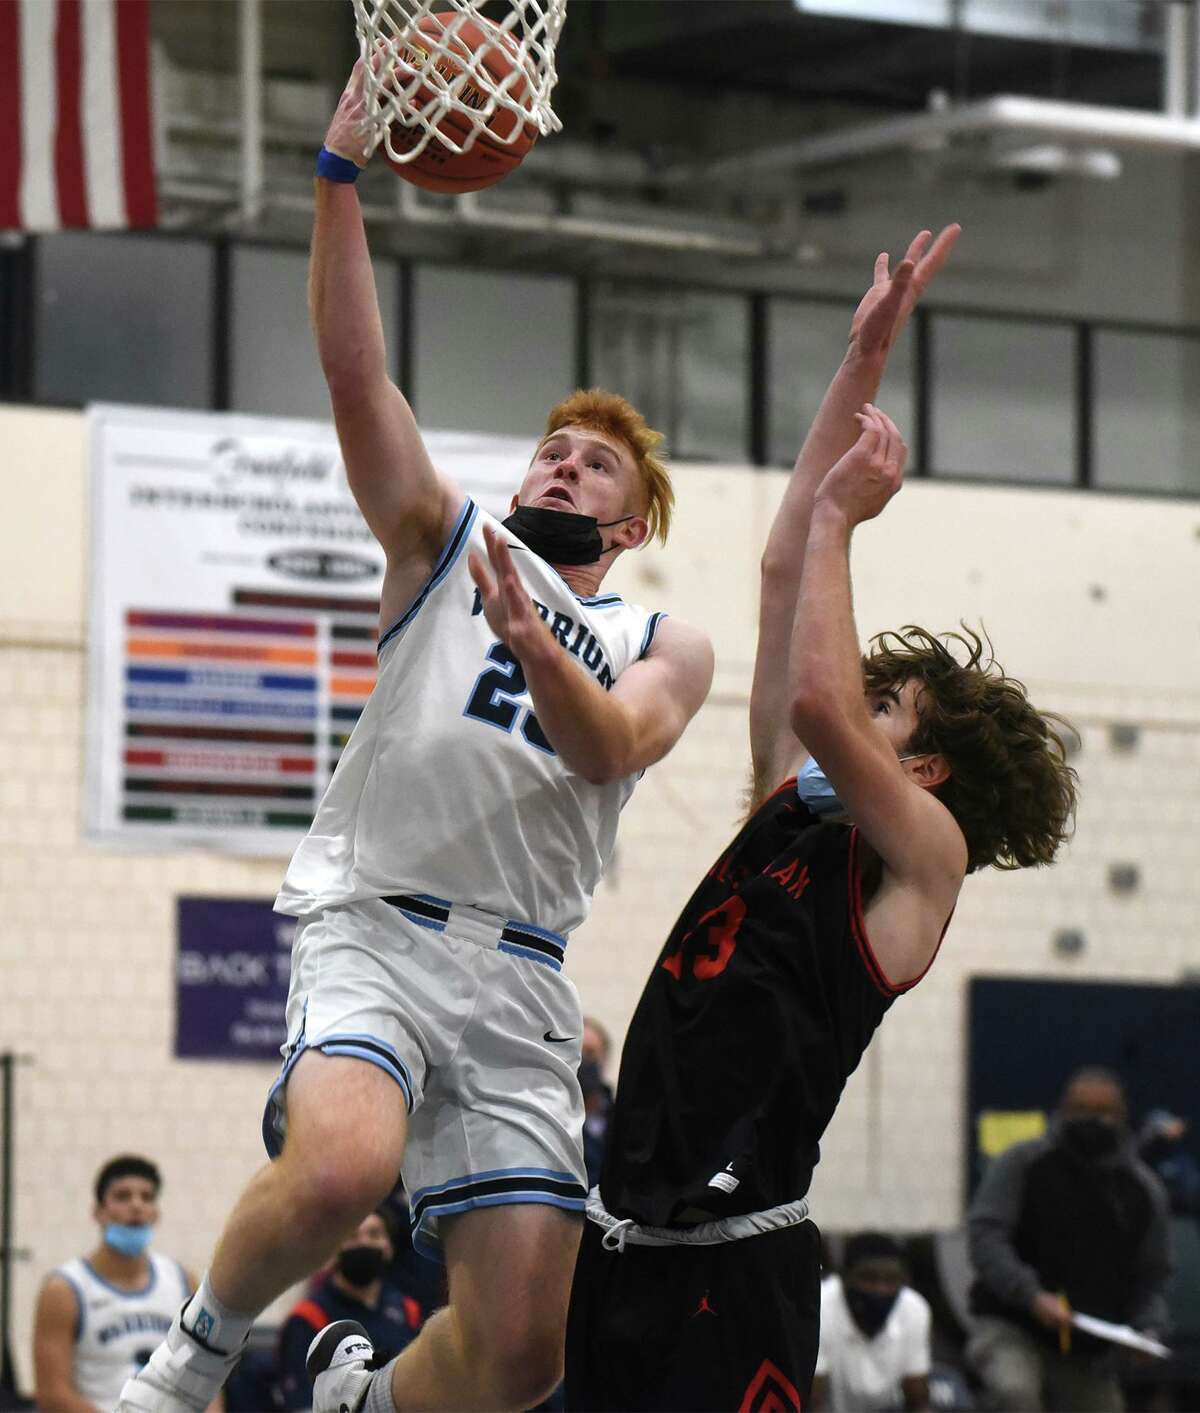 Wilton's Max Edwards (23) goes up for a shot over New Canaan's Santi Lacayo (13) during a boys basketball game in Wilton on Friday, Jan. 14, 2022.